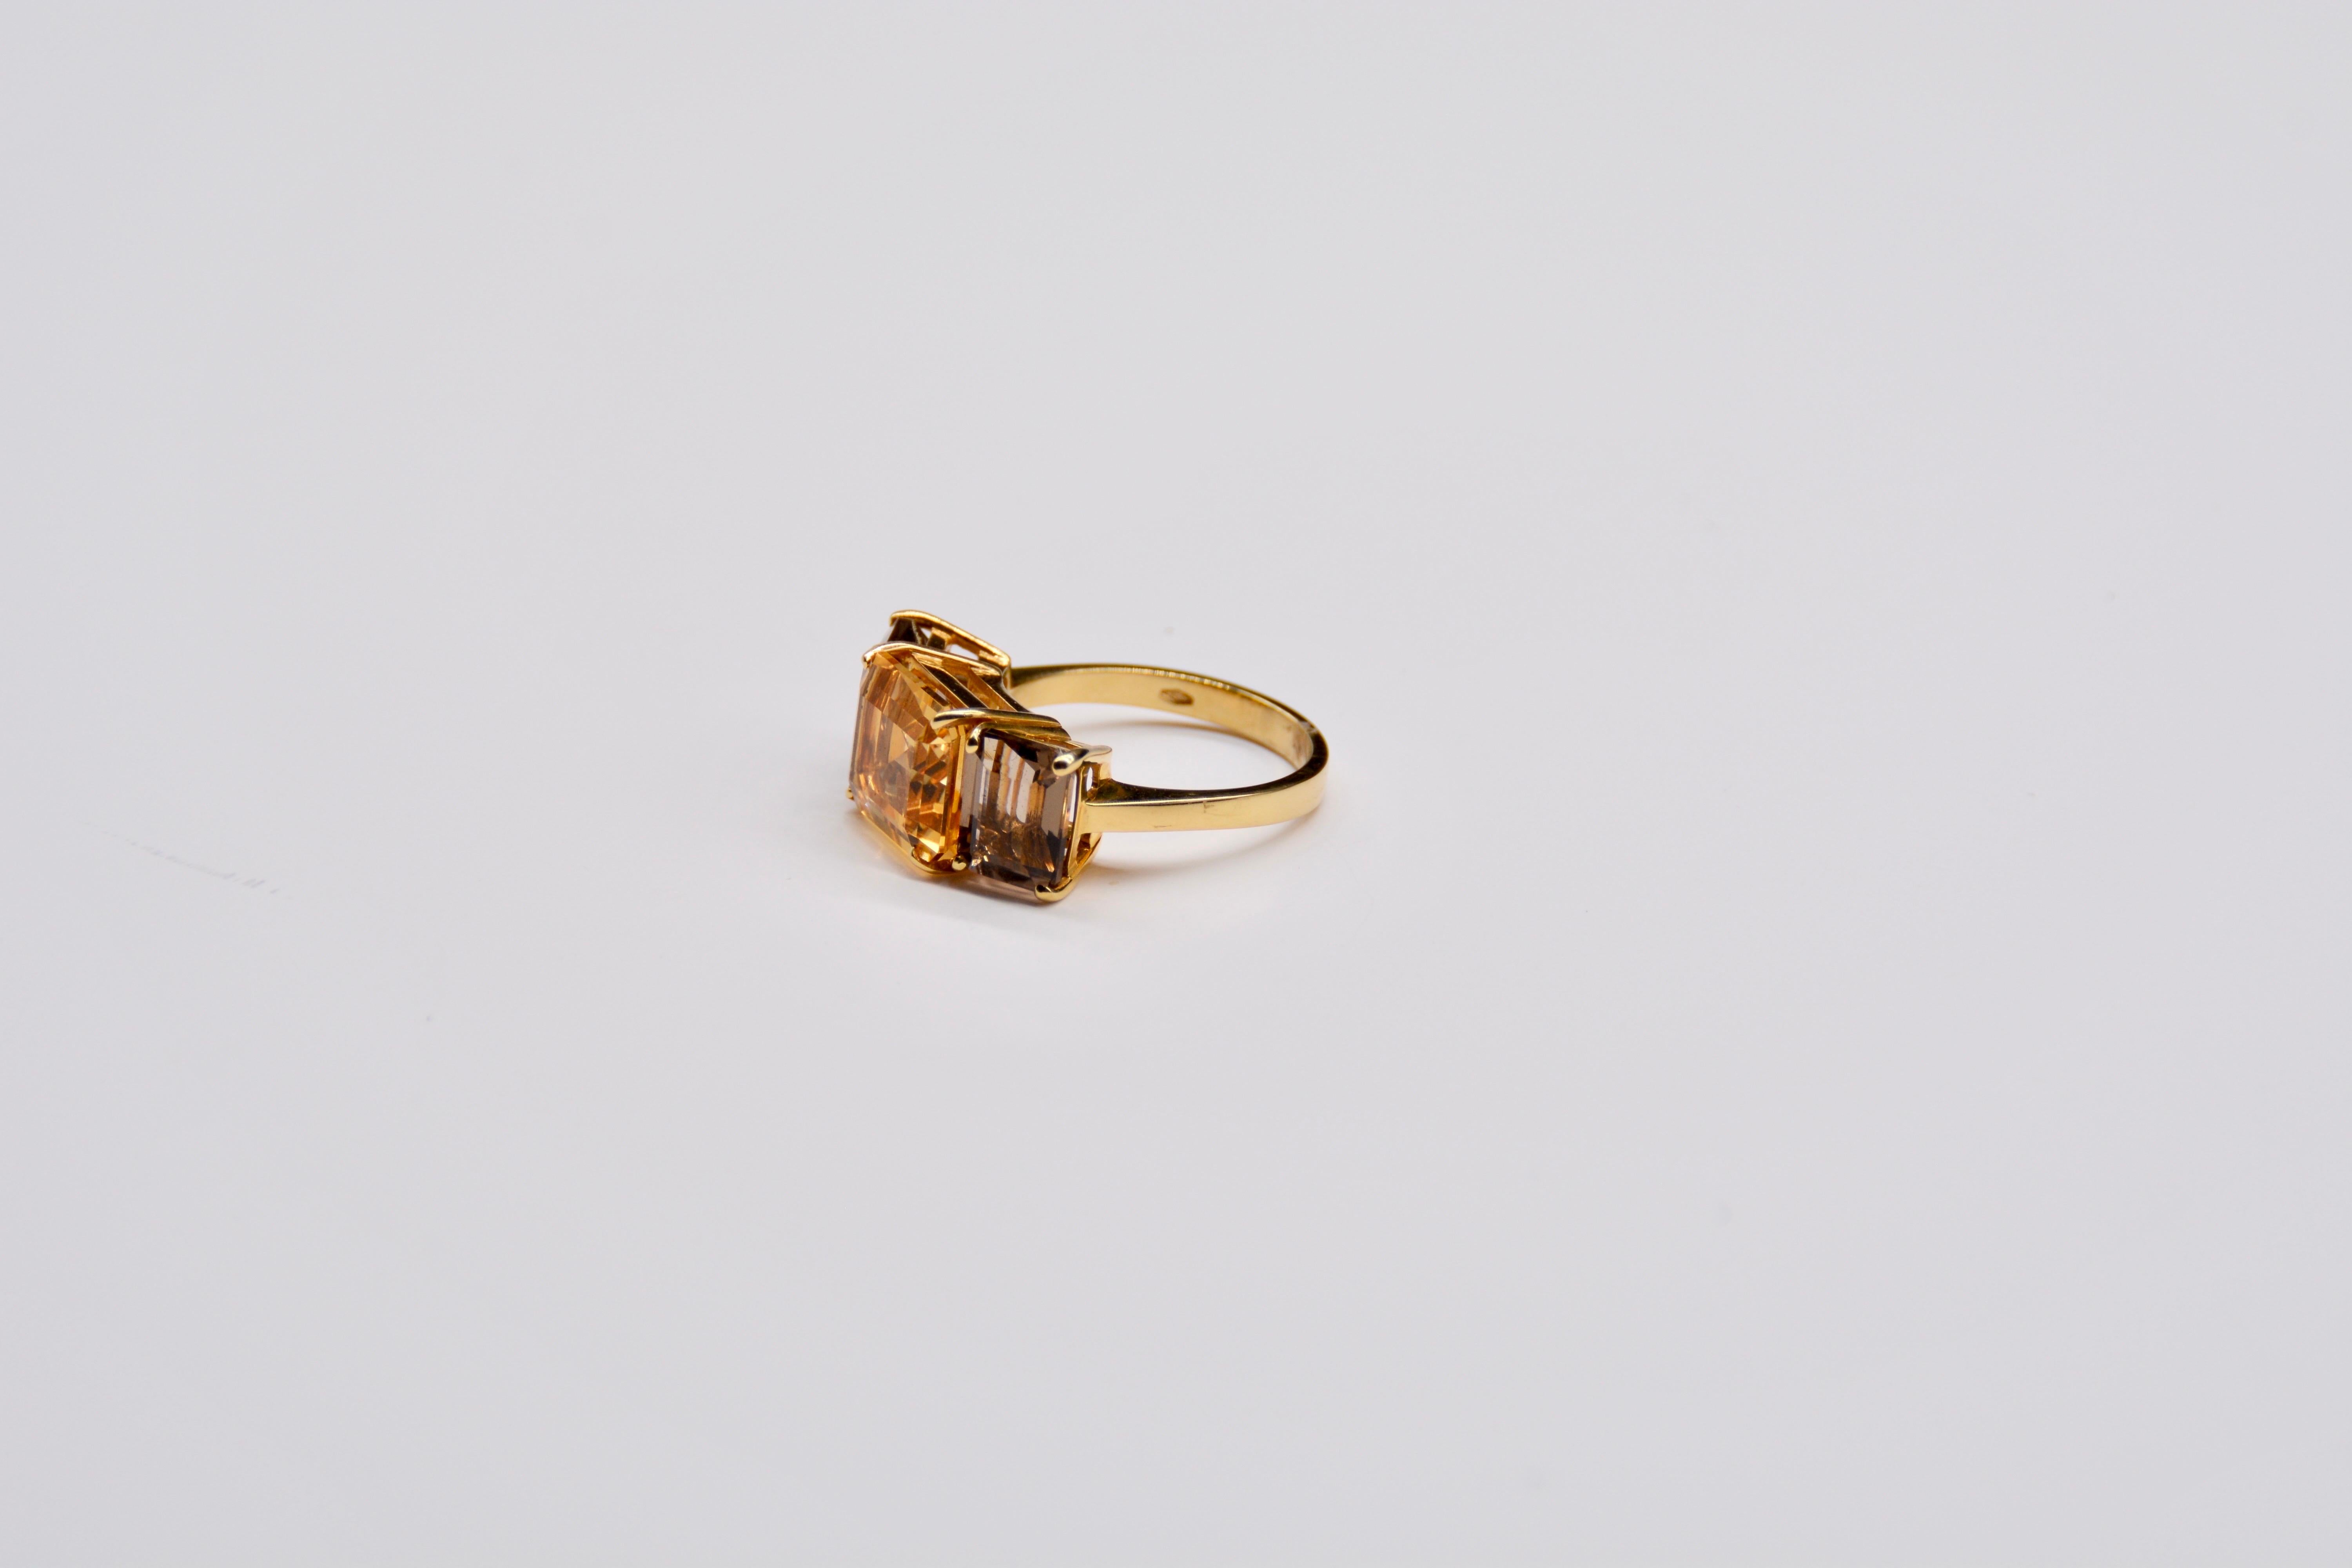 French Ring Yellow Gold Citrine Smoky Quartz For Sale 5